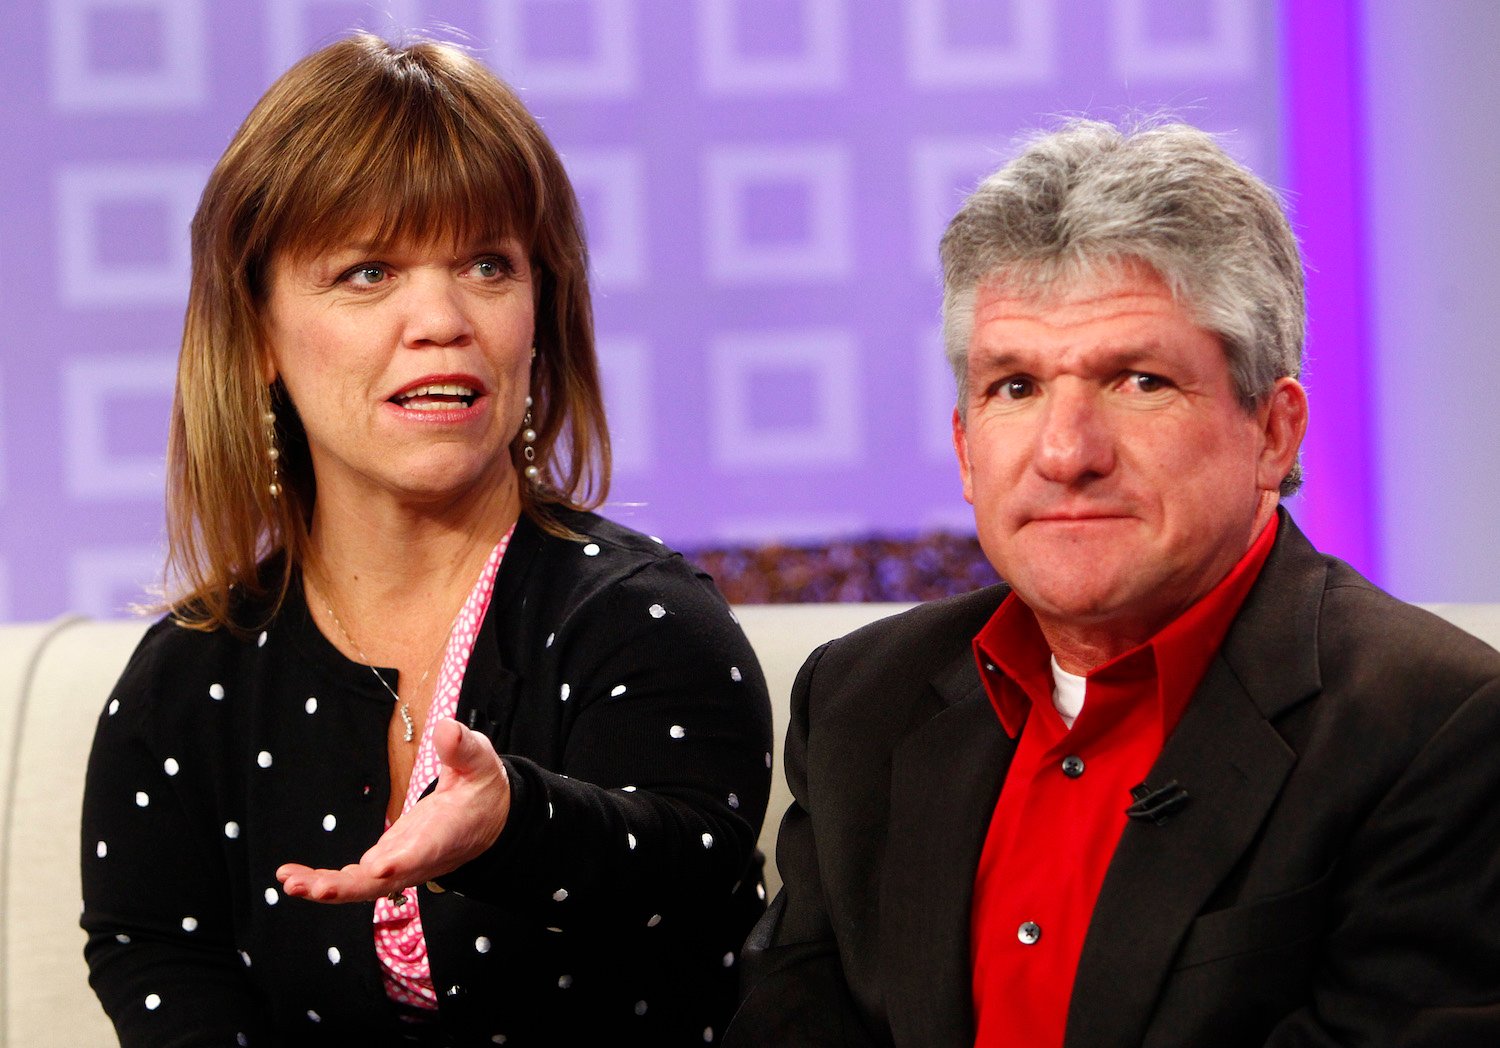 Amy Roloff and Matt Roloff from 'Little People, Big World' sitting together and speaking to an interviewer